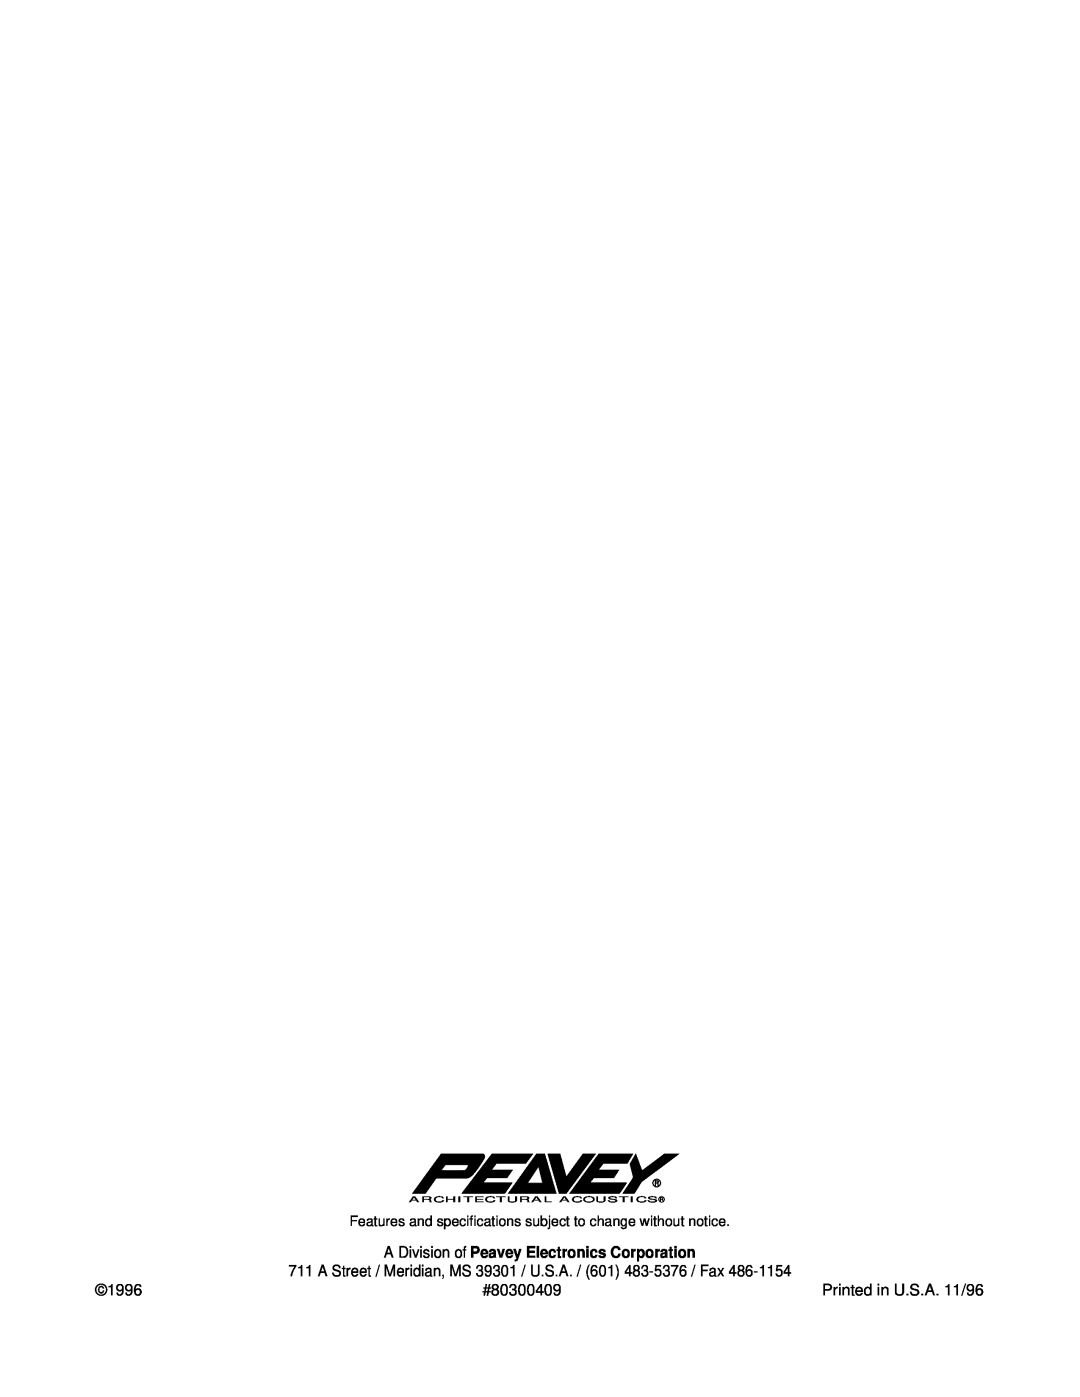 Peavey 108TM specifications #80300409, A Division of Peavey Electronics Corporation, Architectural Acoustics 